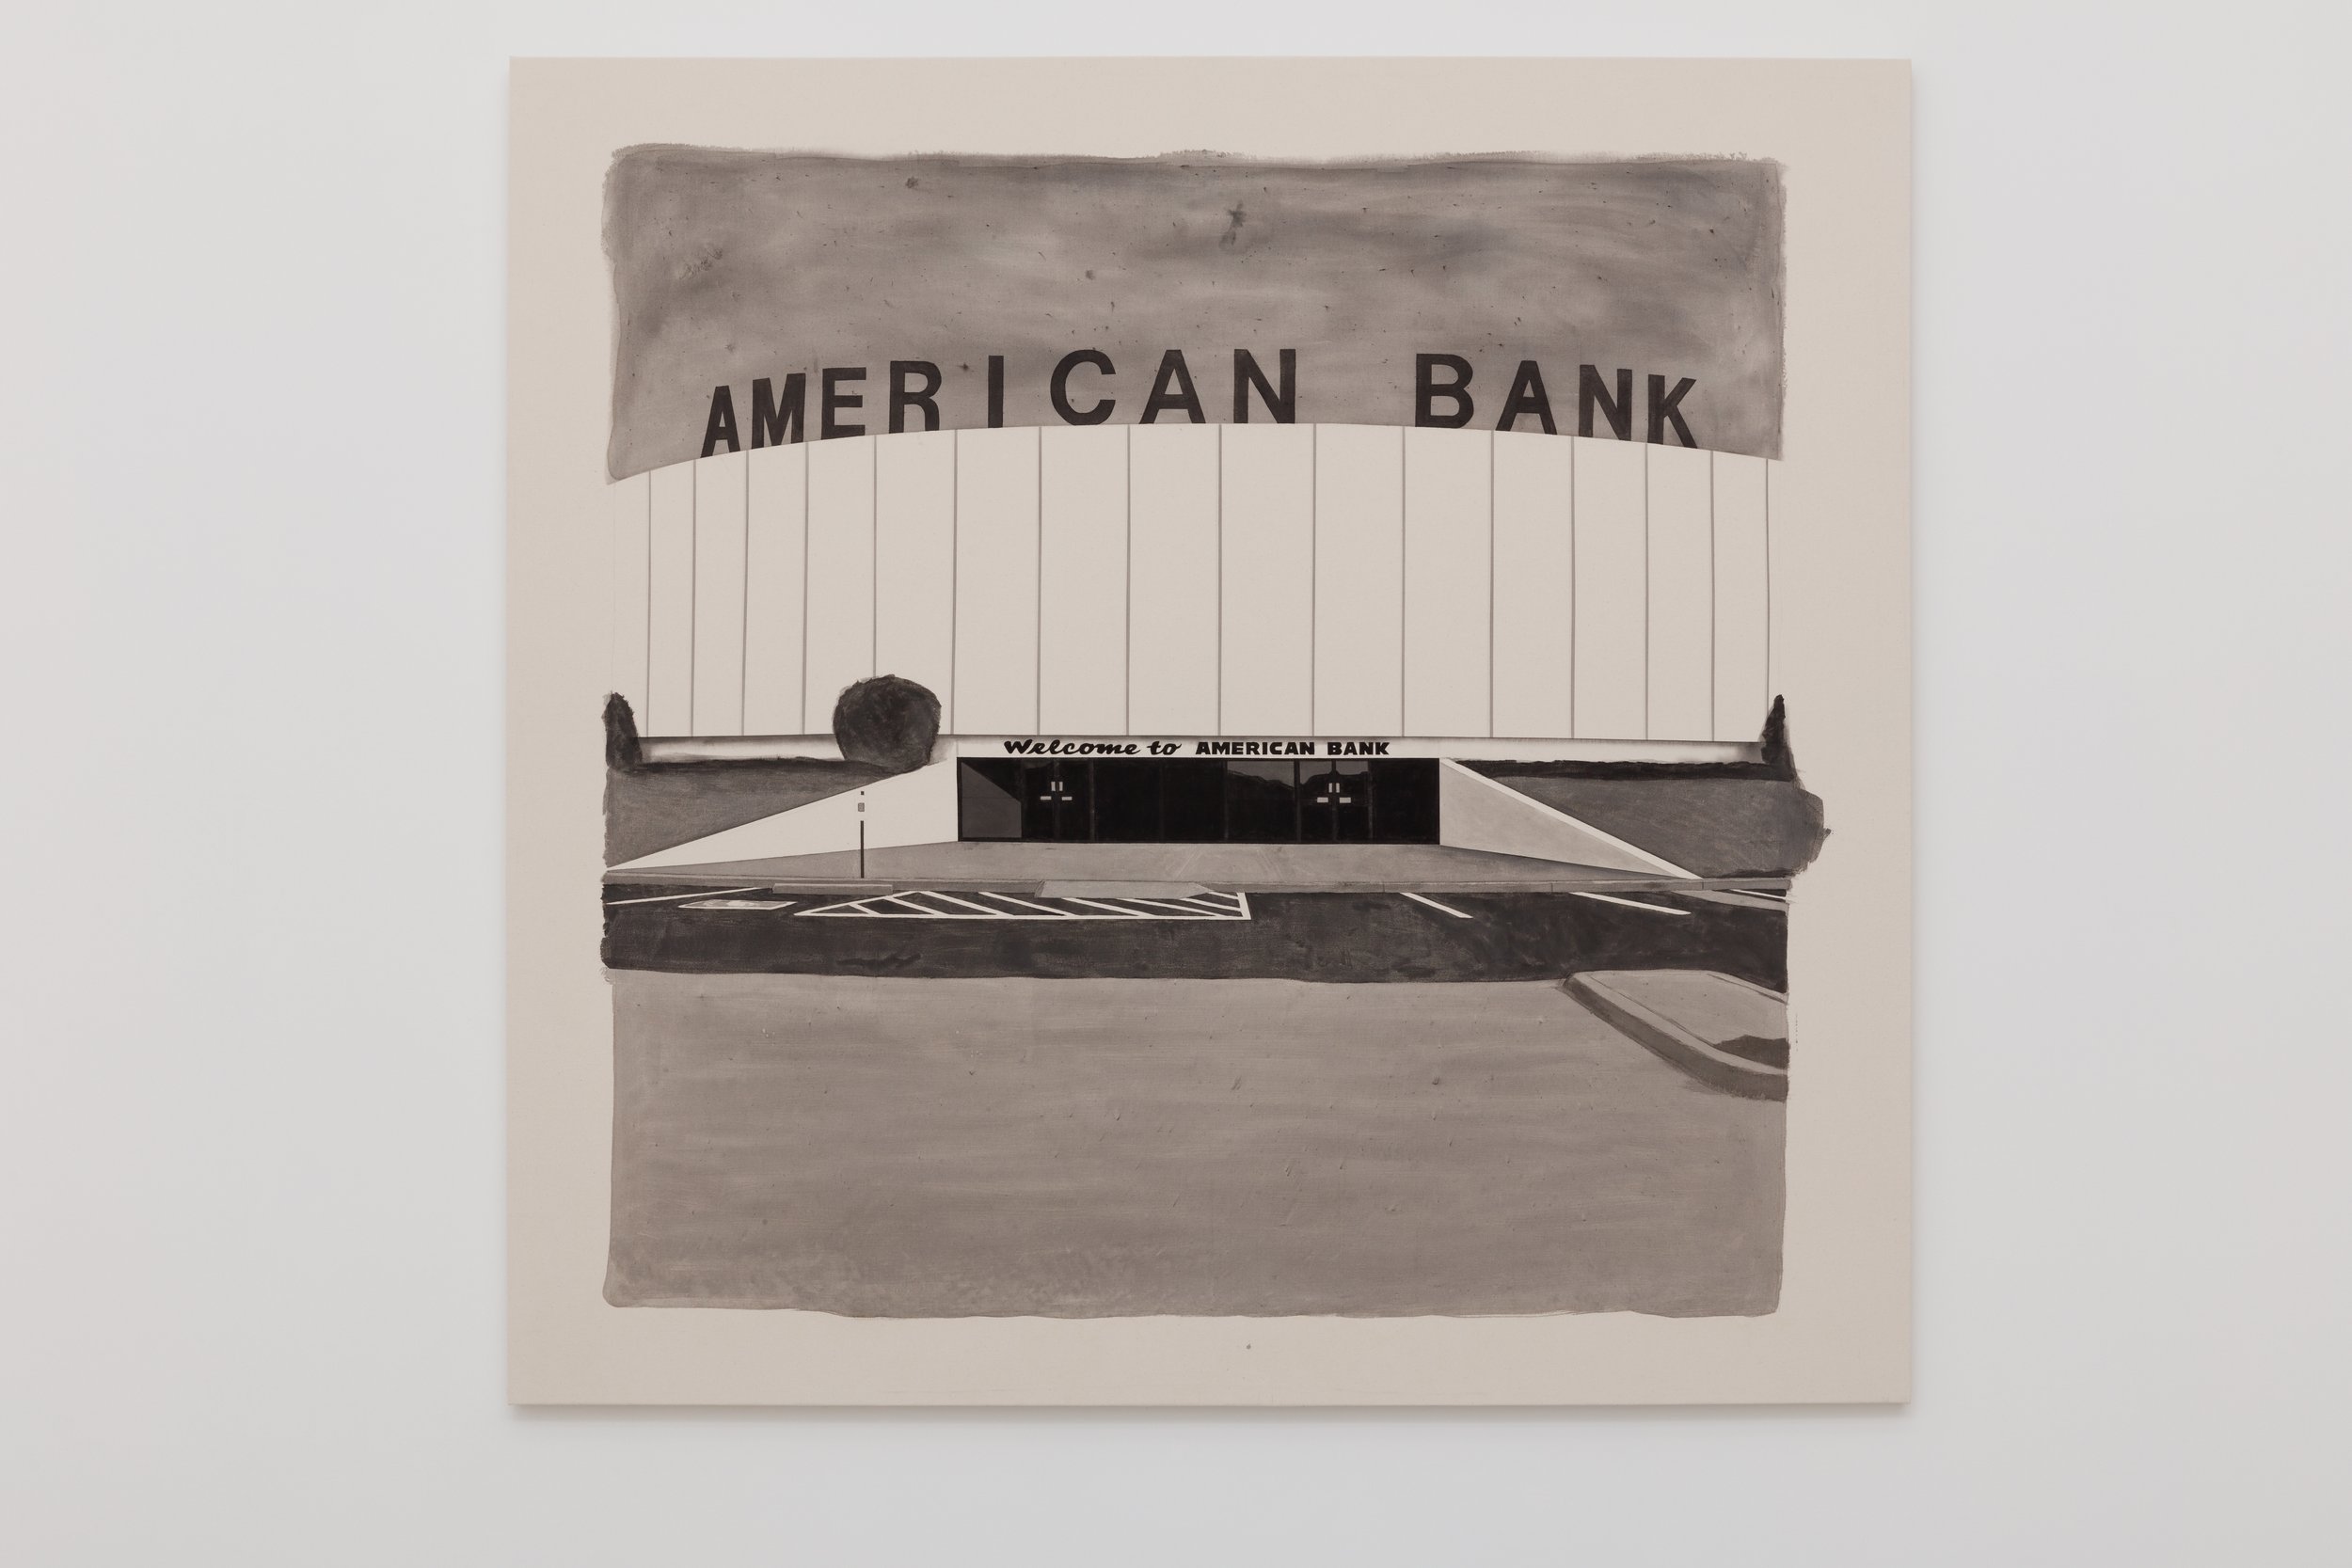   American Bank , 2020 Black gesso on canvas 74 x 77 inches (1.87m x 1.95m) 